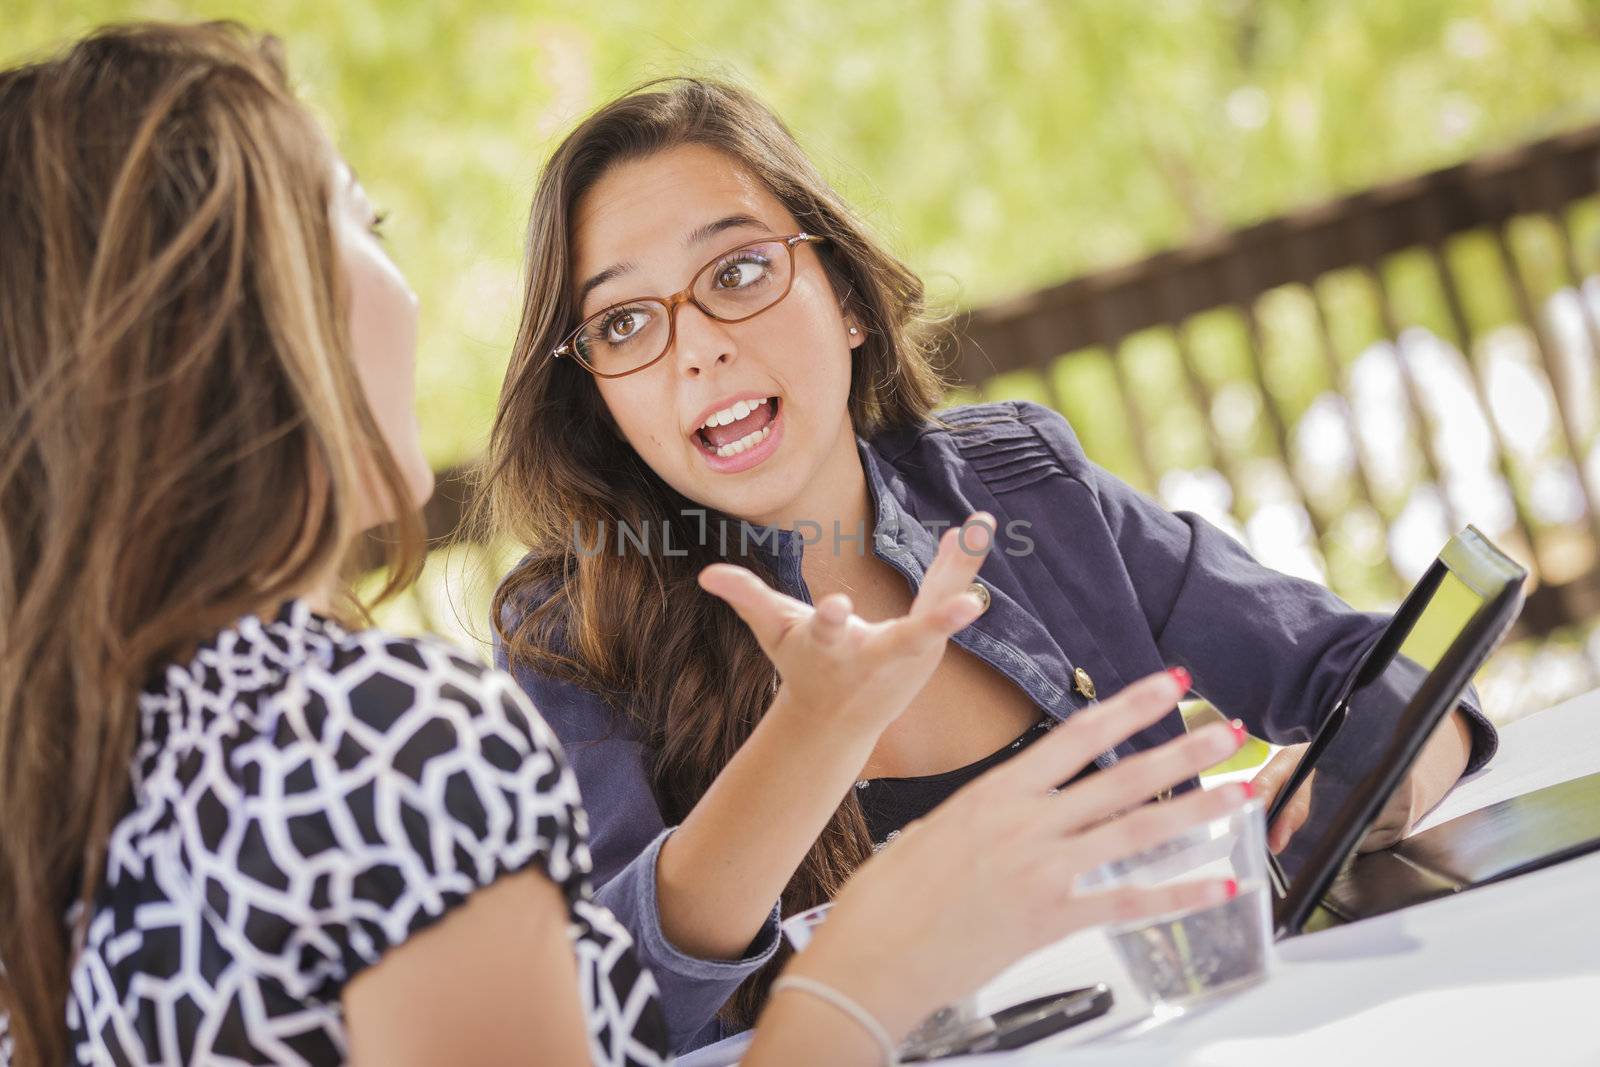 Attractive Mixed Race Girls Smiling and Talking While Working on Tablet Computer Sitting Outdoors.